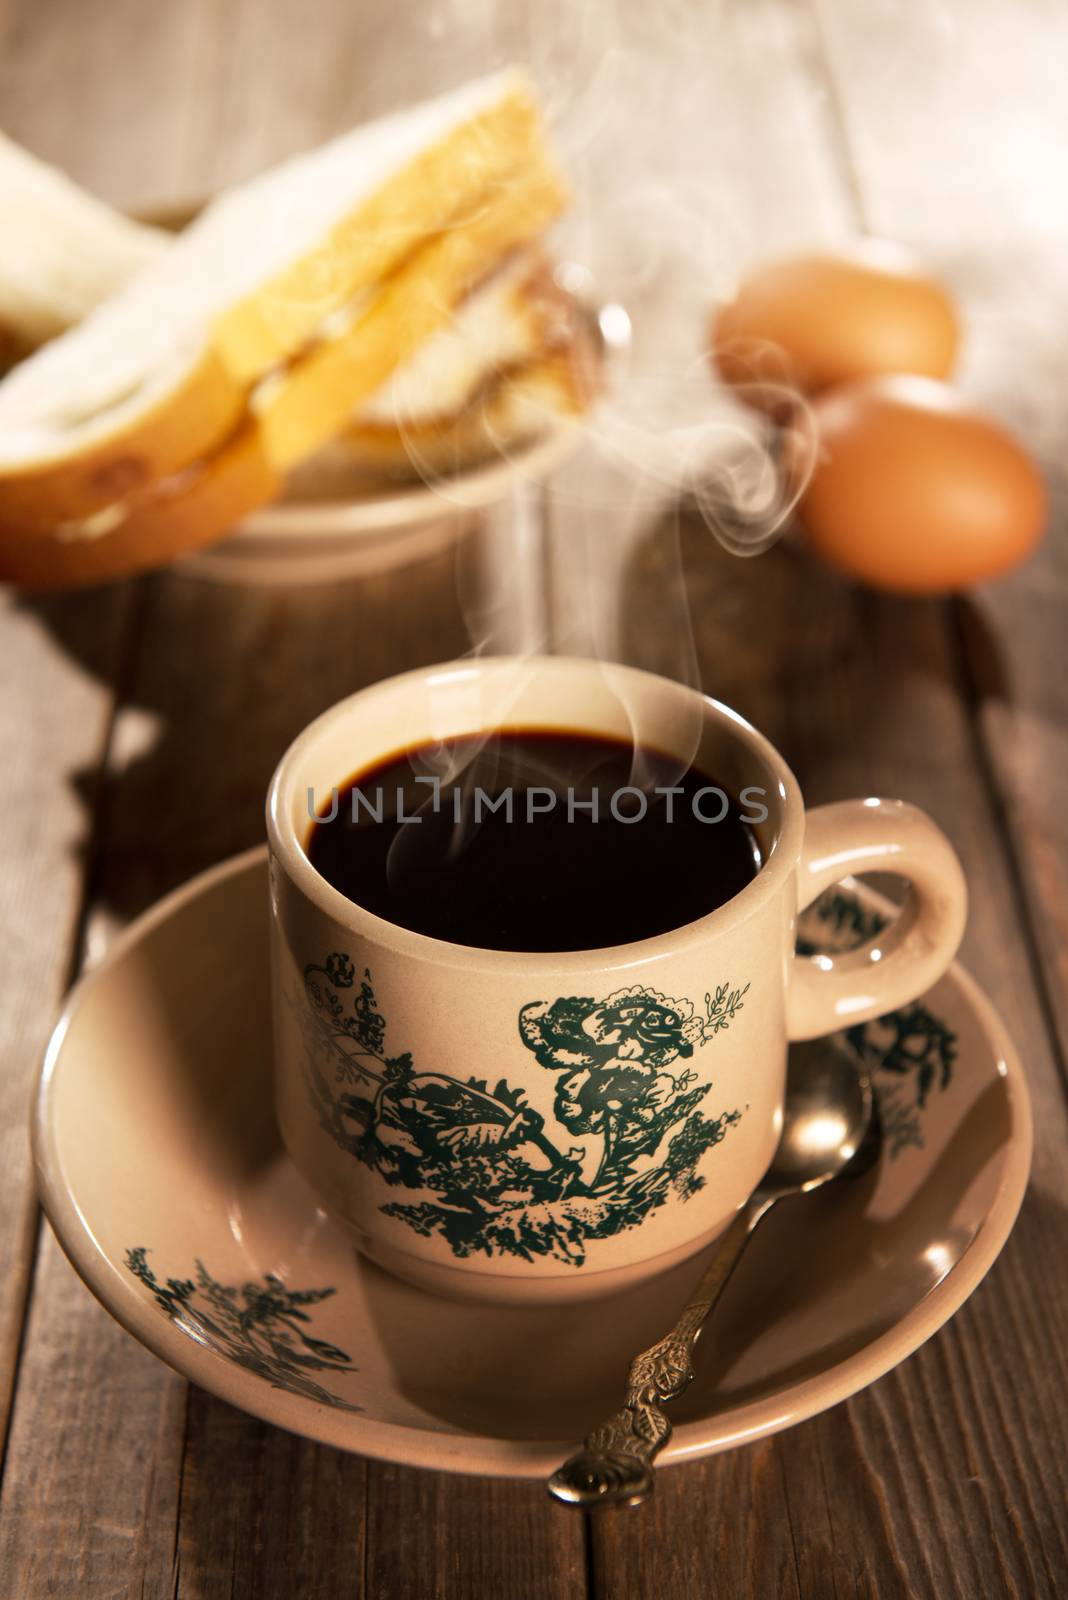 Traditional Singapore Chinese style coffee in vintage mug and saucer with breakfast. Fractal on the cup is generic print. Soft focus dramatic ambient light over wood table.